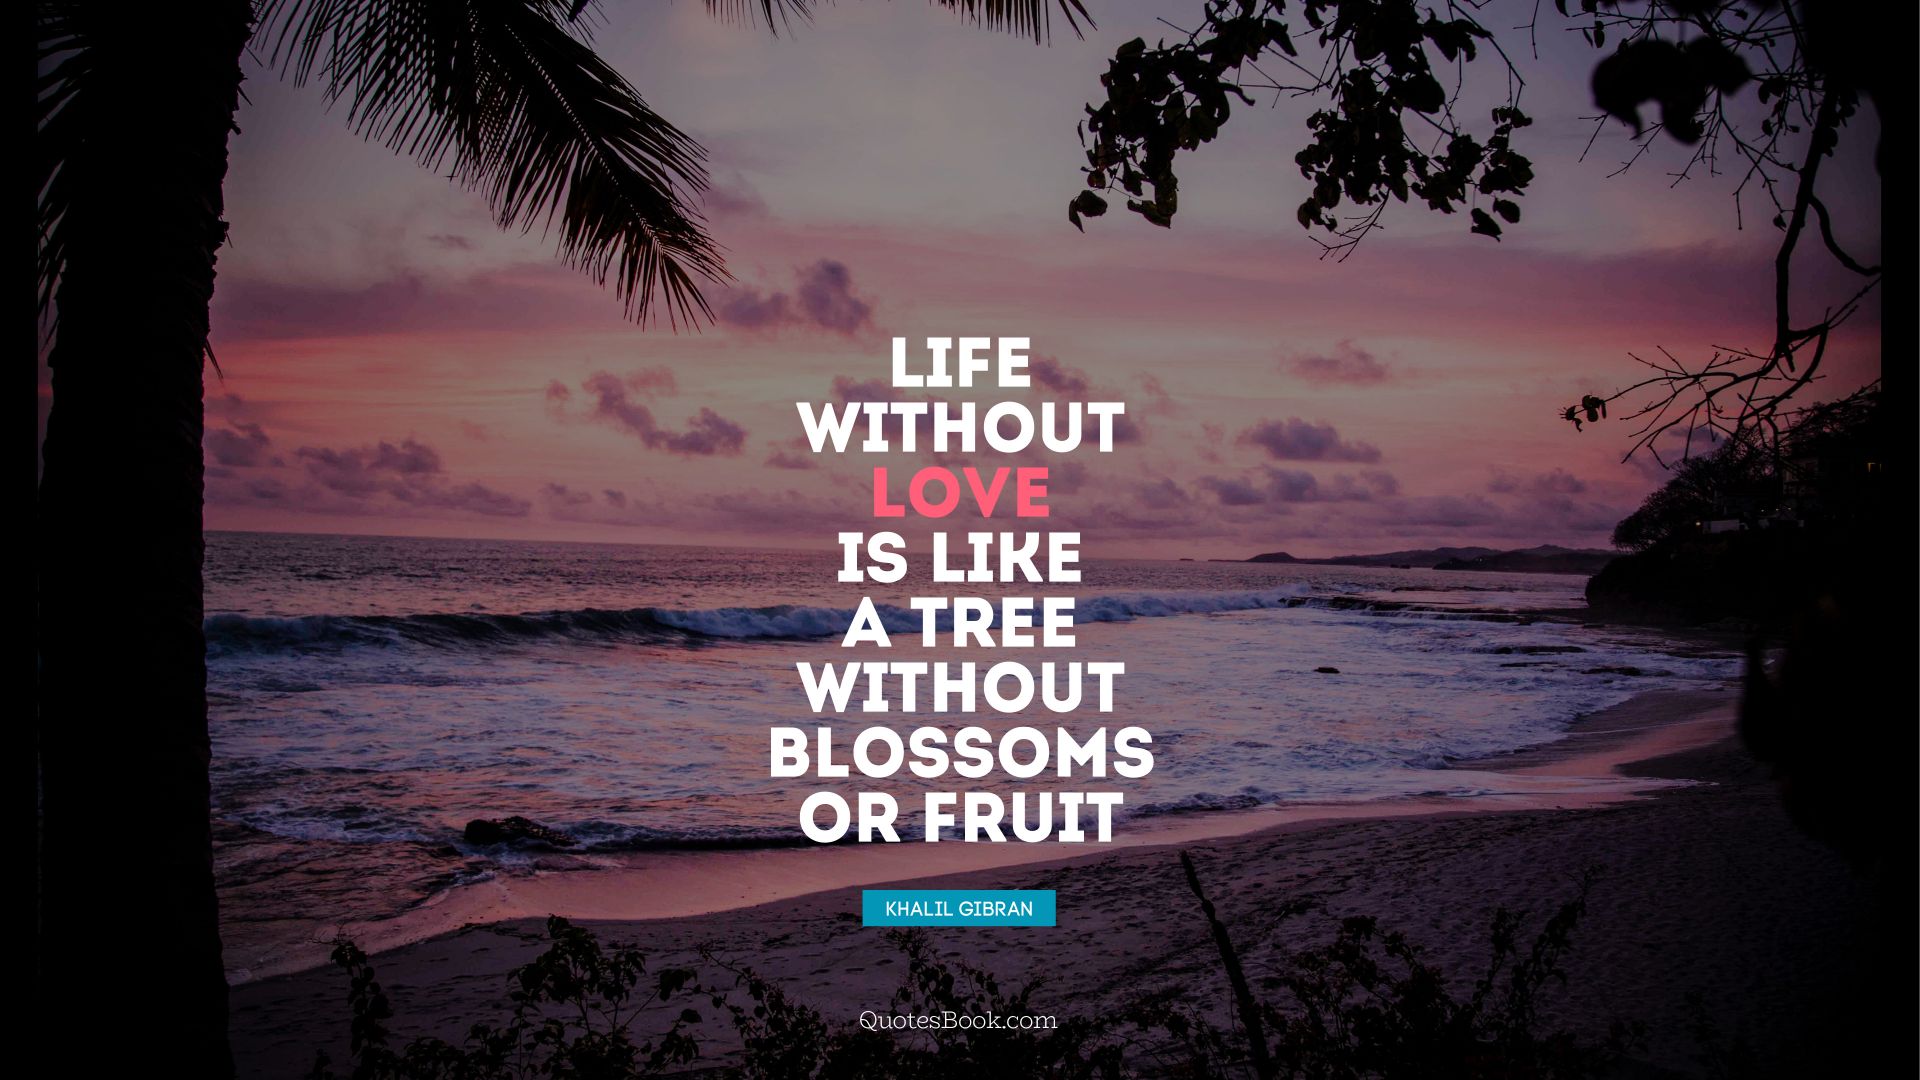 Life without love is like a tree without blossoms or fruit